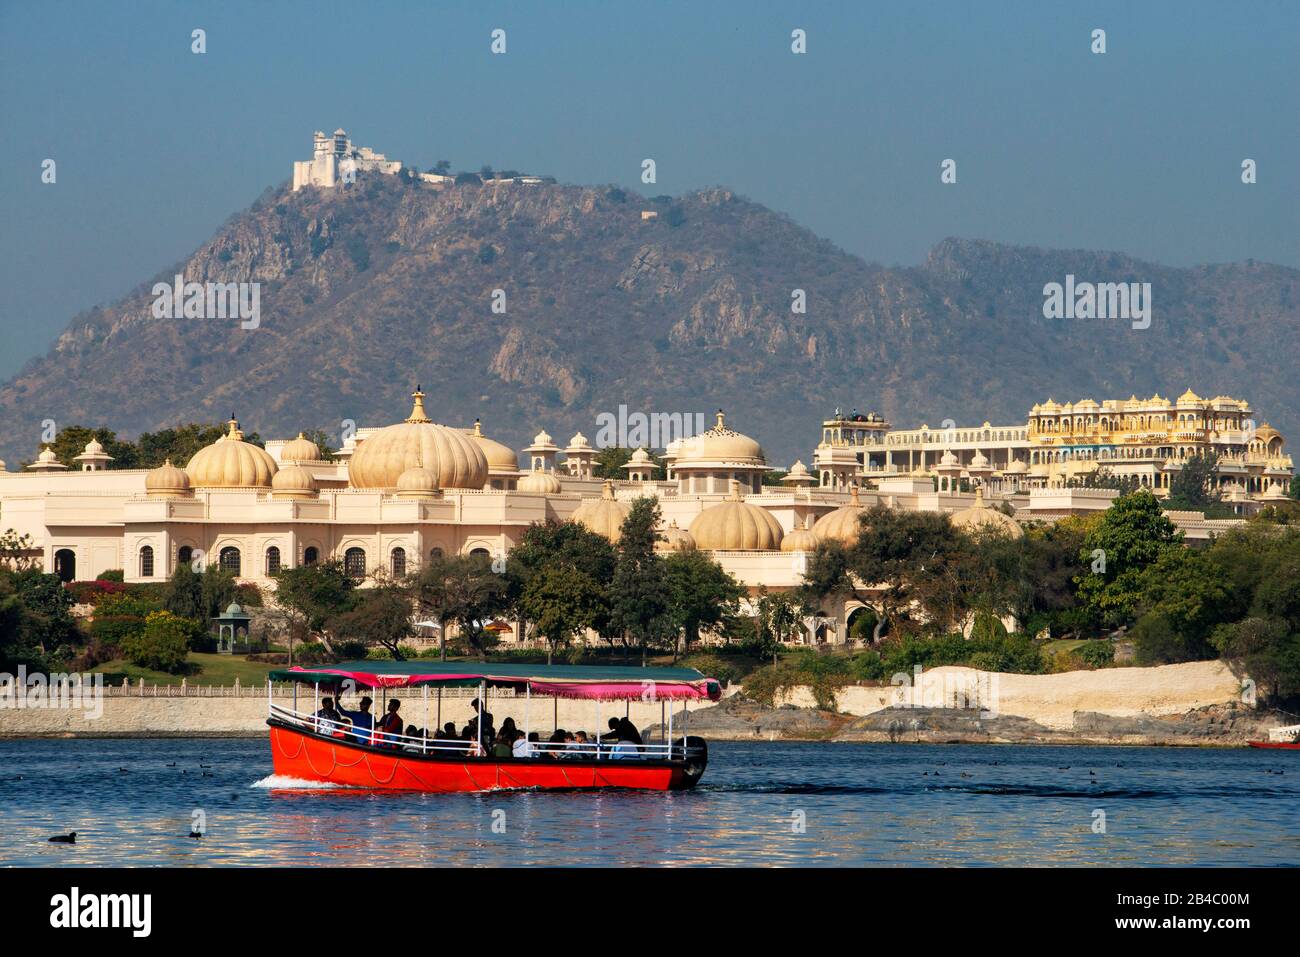 Oberoi Hotel in the Lake Pichola Udaipur Rajasthan India. This is one of the excursion of the Luxury train Maharajas express. Stock Photo